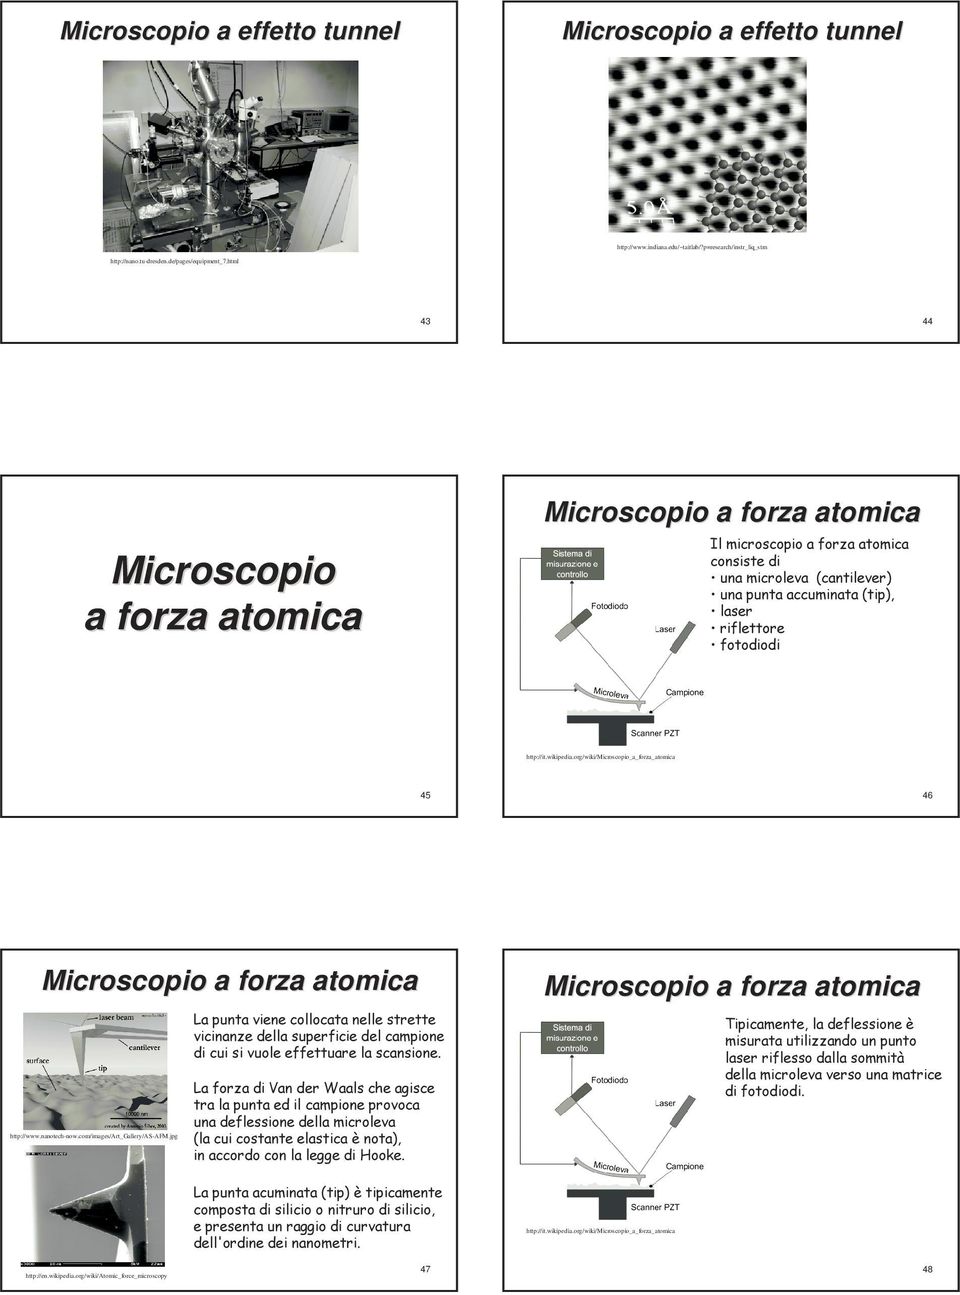 http://it.wikipedia.org/wiki/microscopio_a_forza_atomica 45 46 Microscopio a forza atomica http://www.nanotech-now.com/images/art_gallery/as-afm.